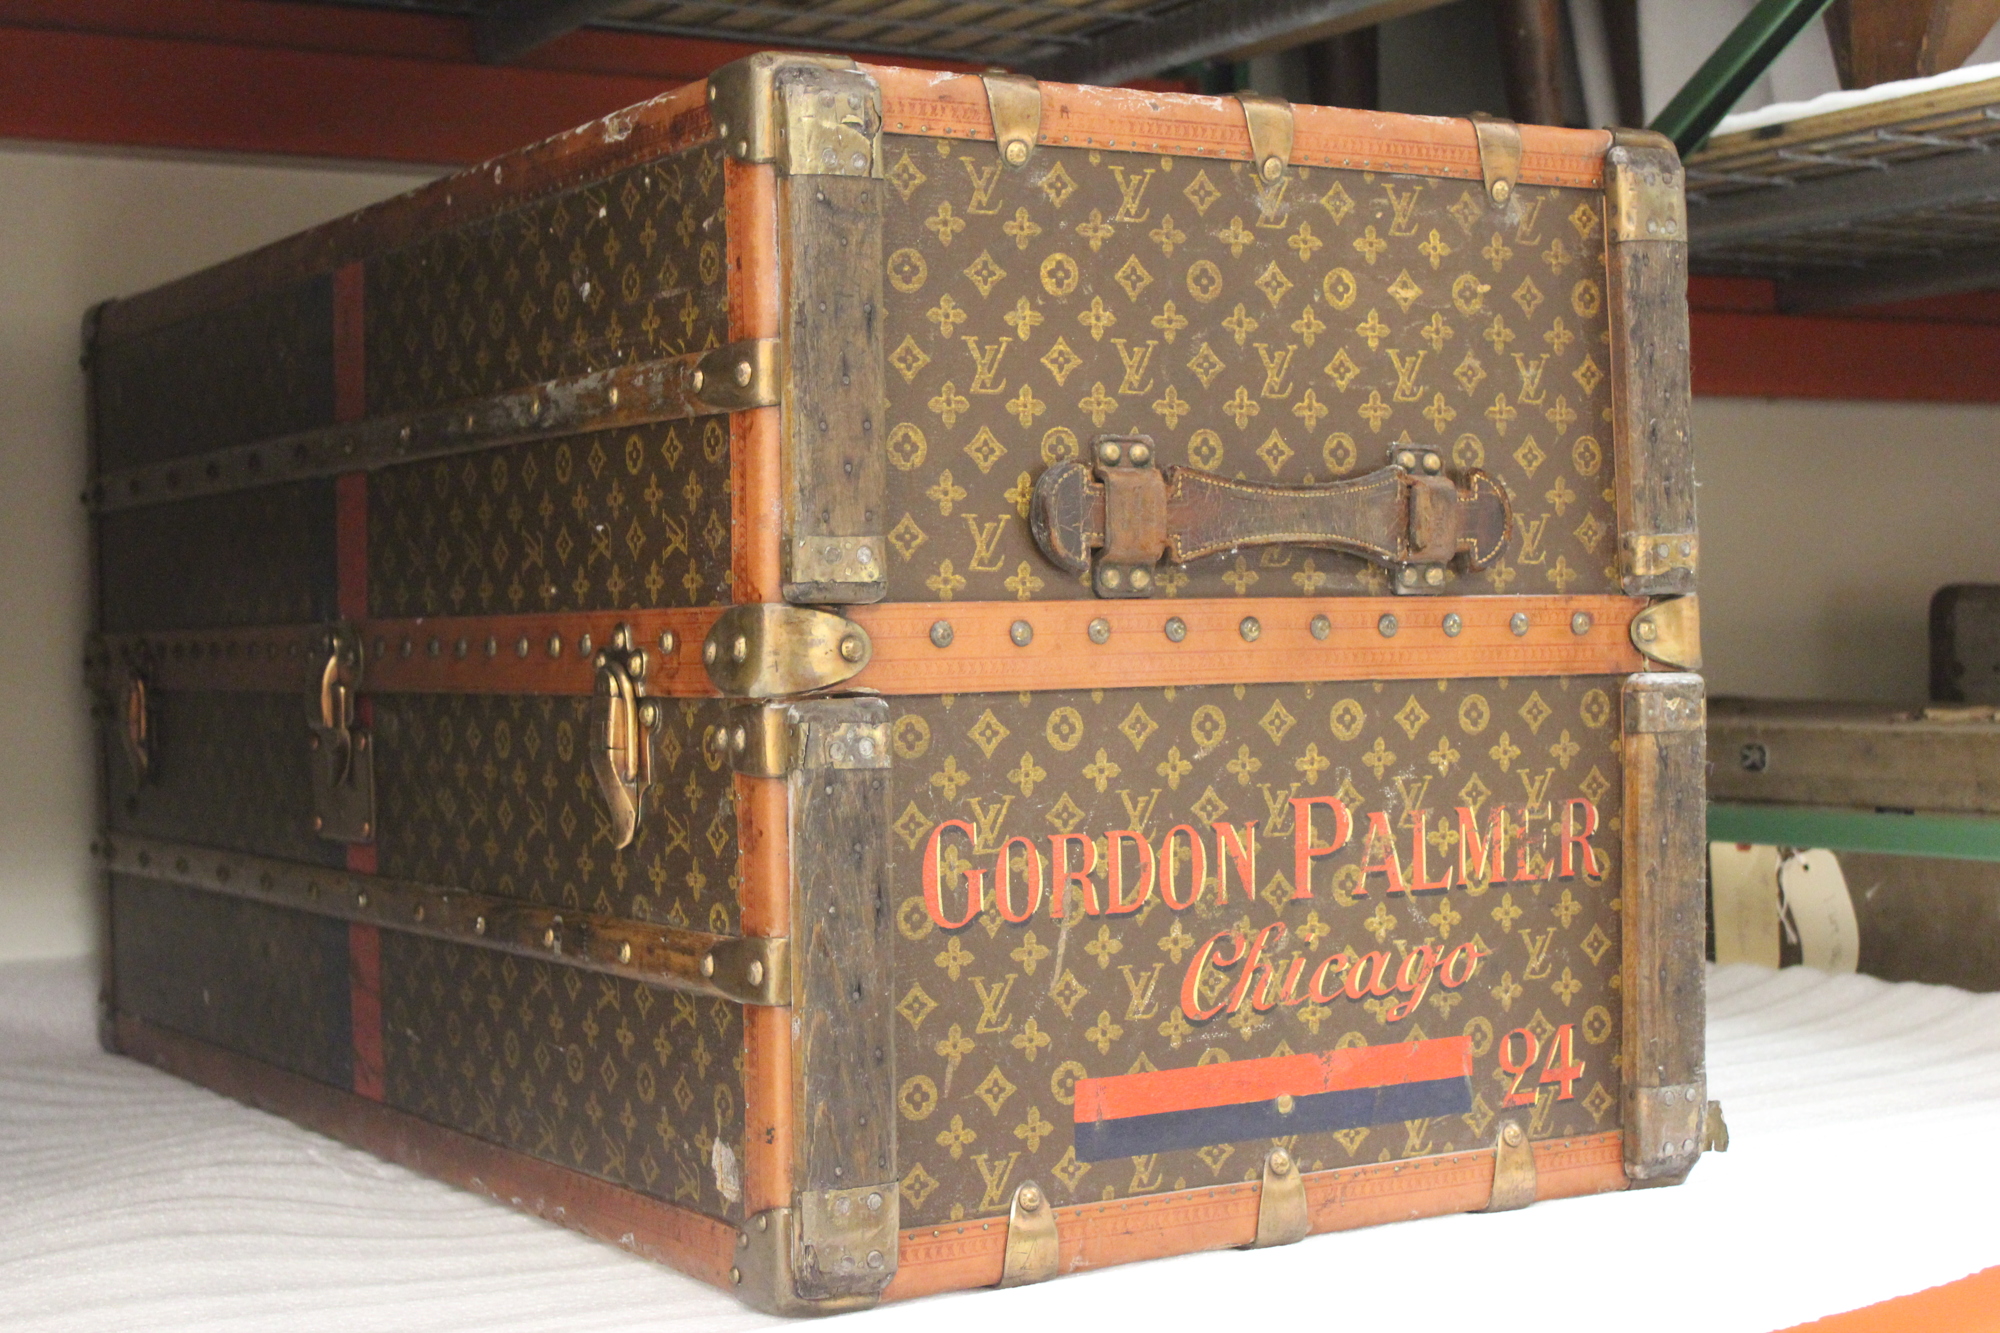 The facility houses an old Louis Vuitton steamer trunk that belonged to Gordon Palmer.